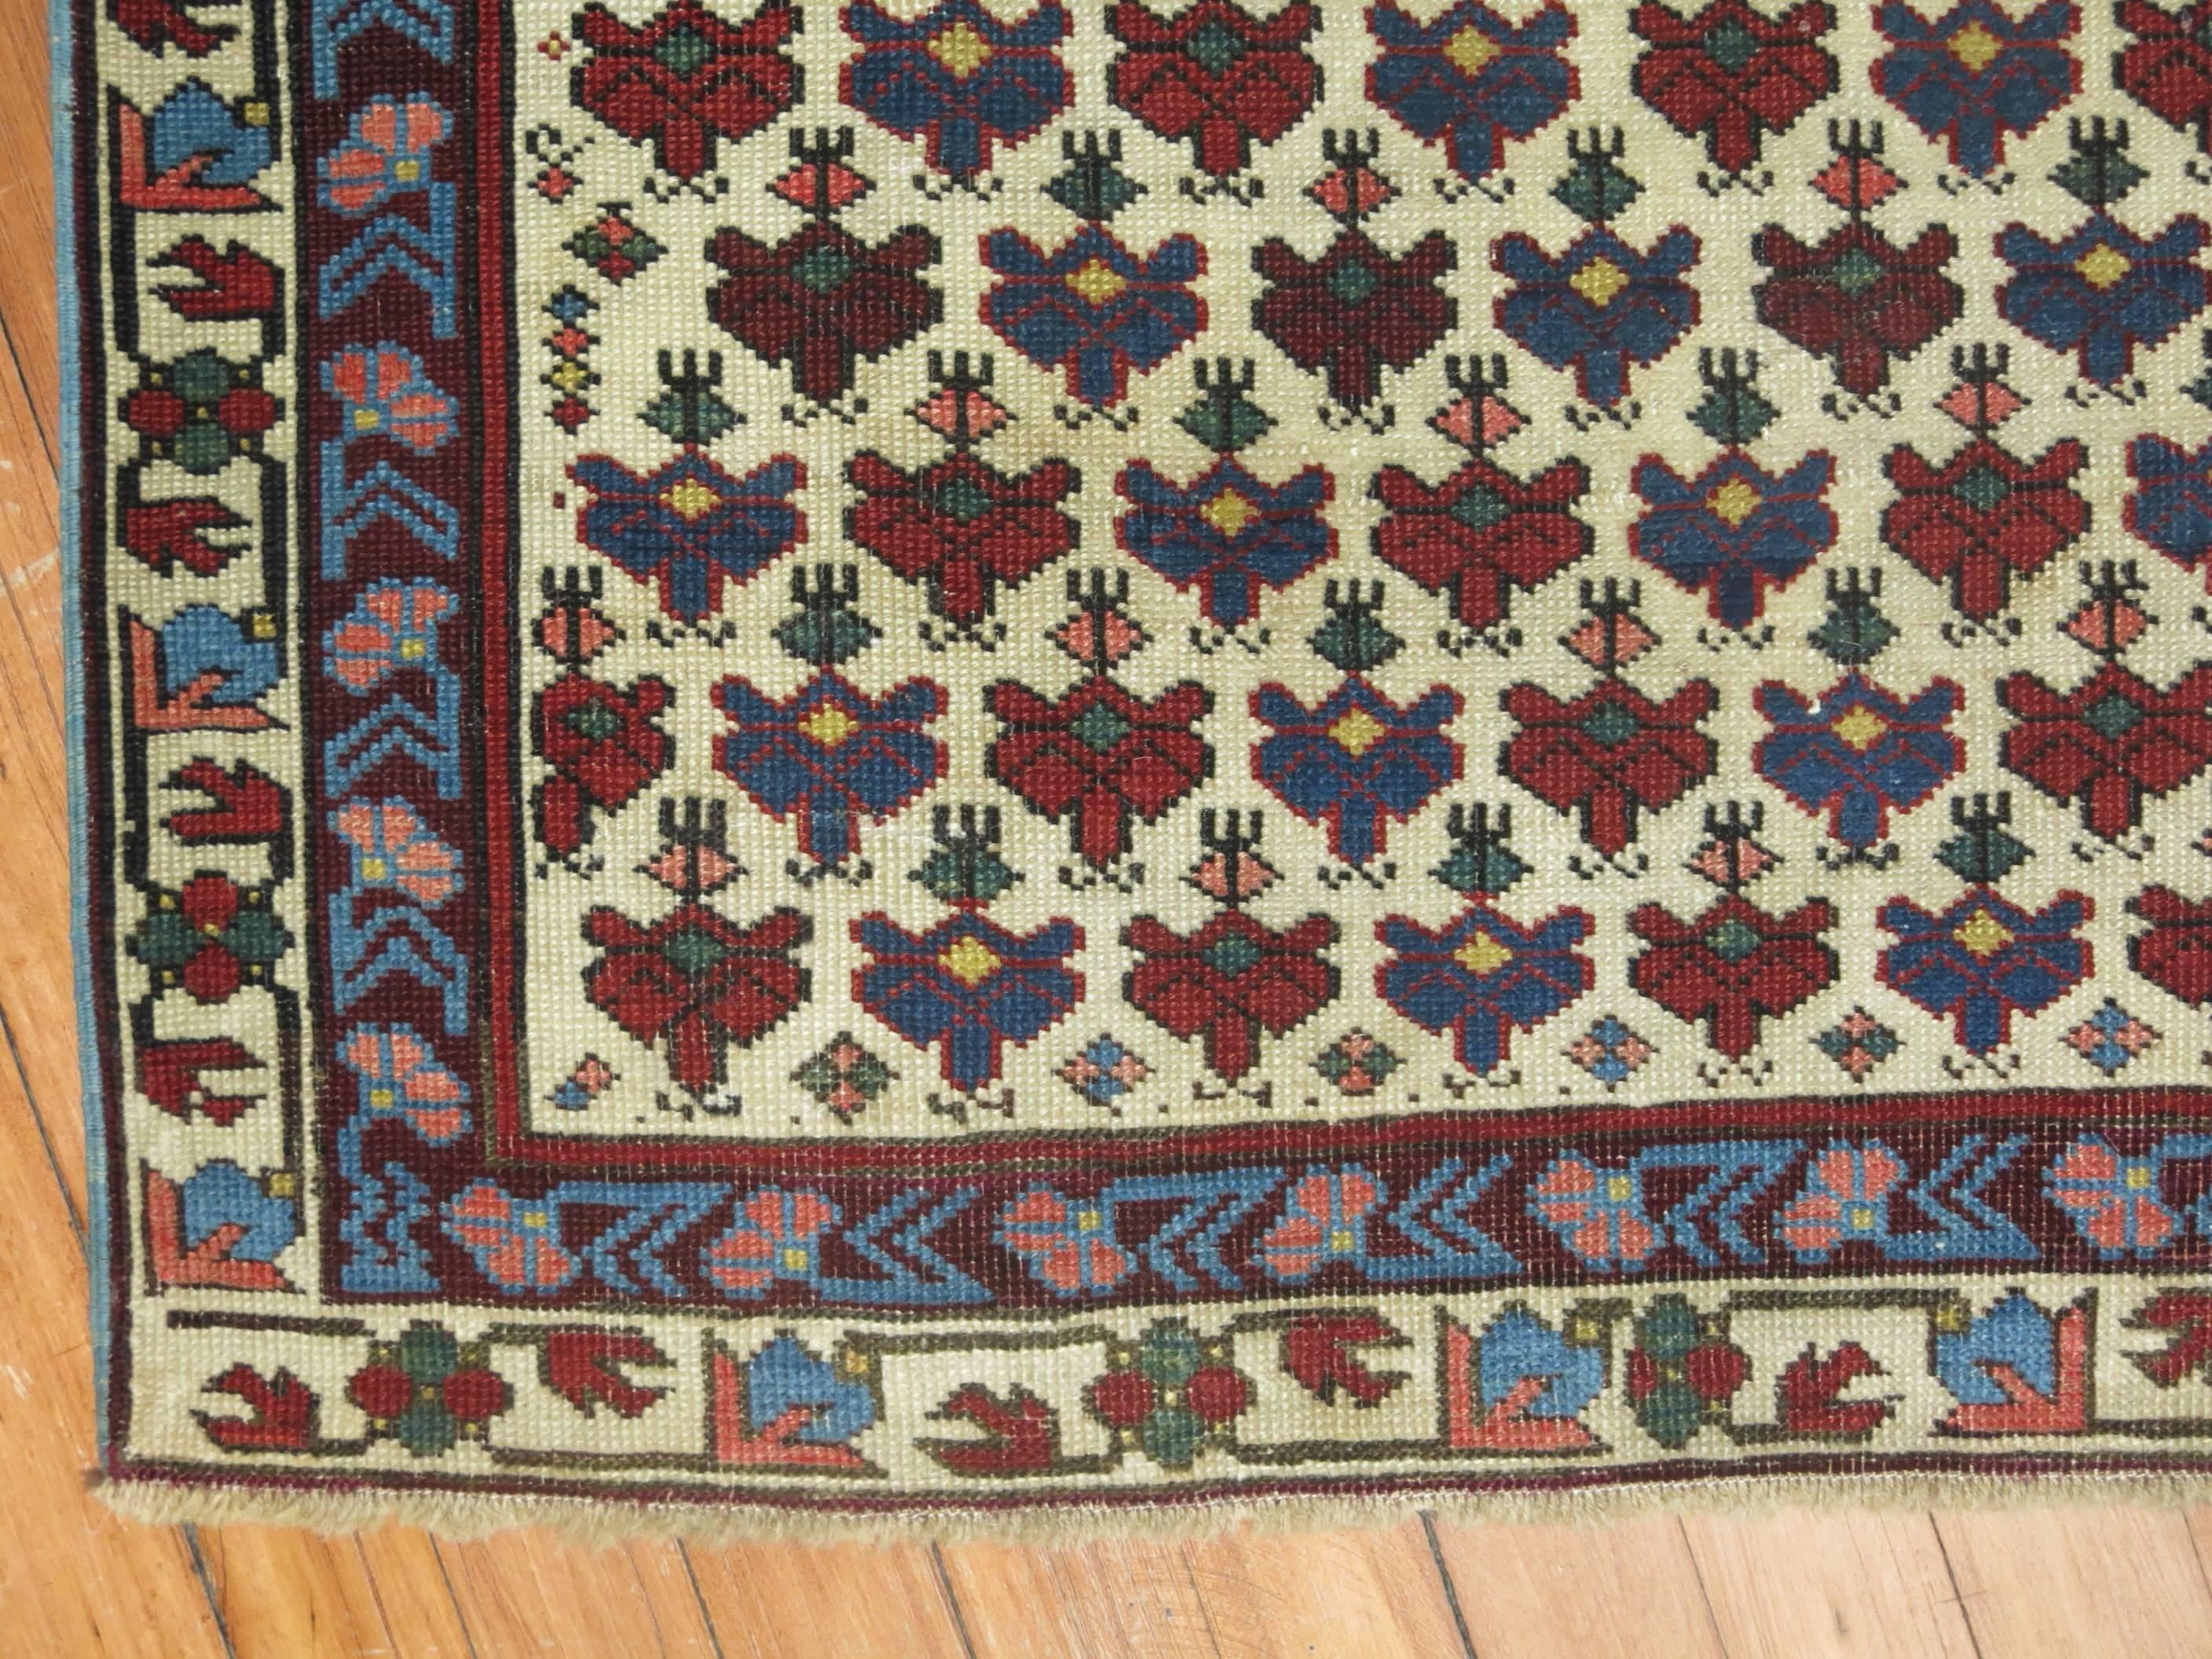 A versatile antique Kuba rug from the Caucuses in excellent shape. Can be used as a wall decor or throw piece too.

The town of Kuba, like Gandje, was a collection point for rugs from the eponymous mountainous region, due to its location on the